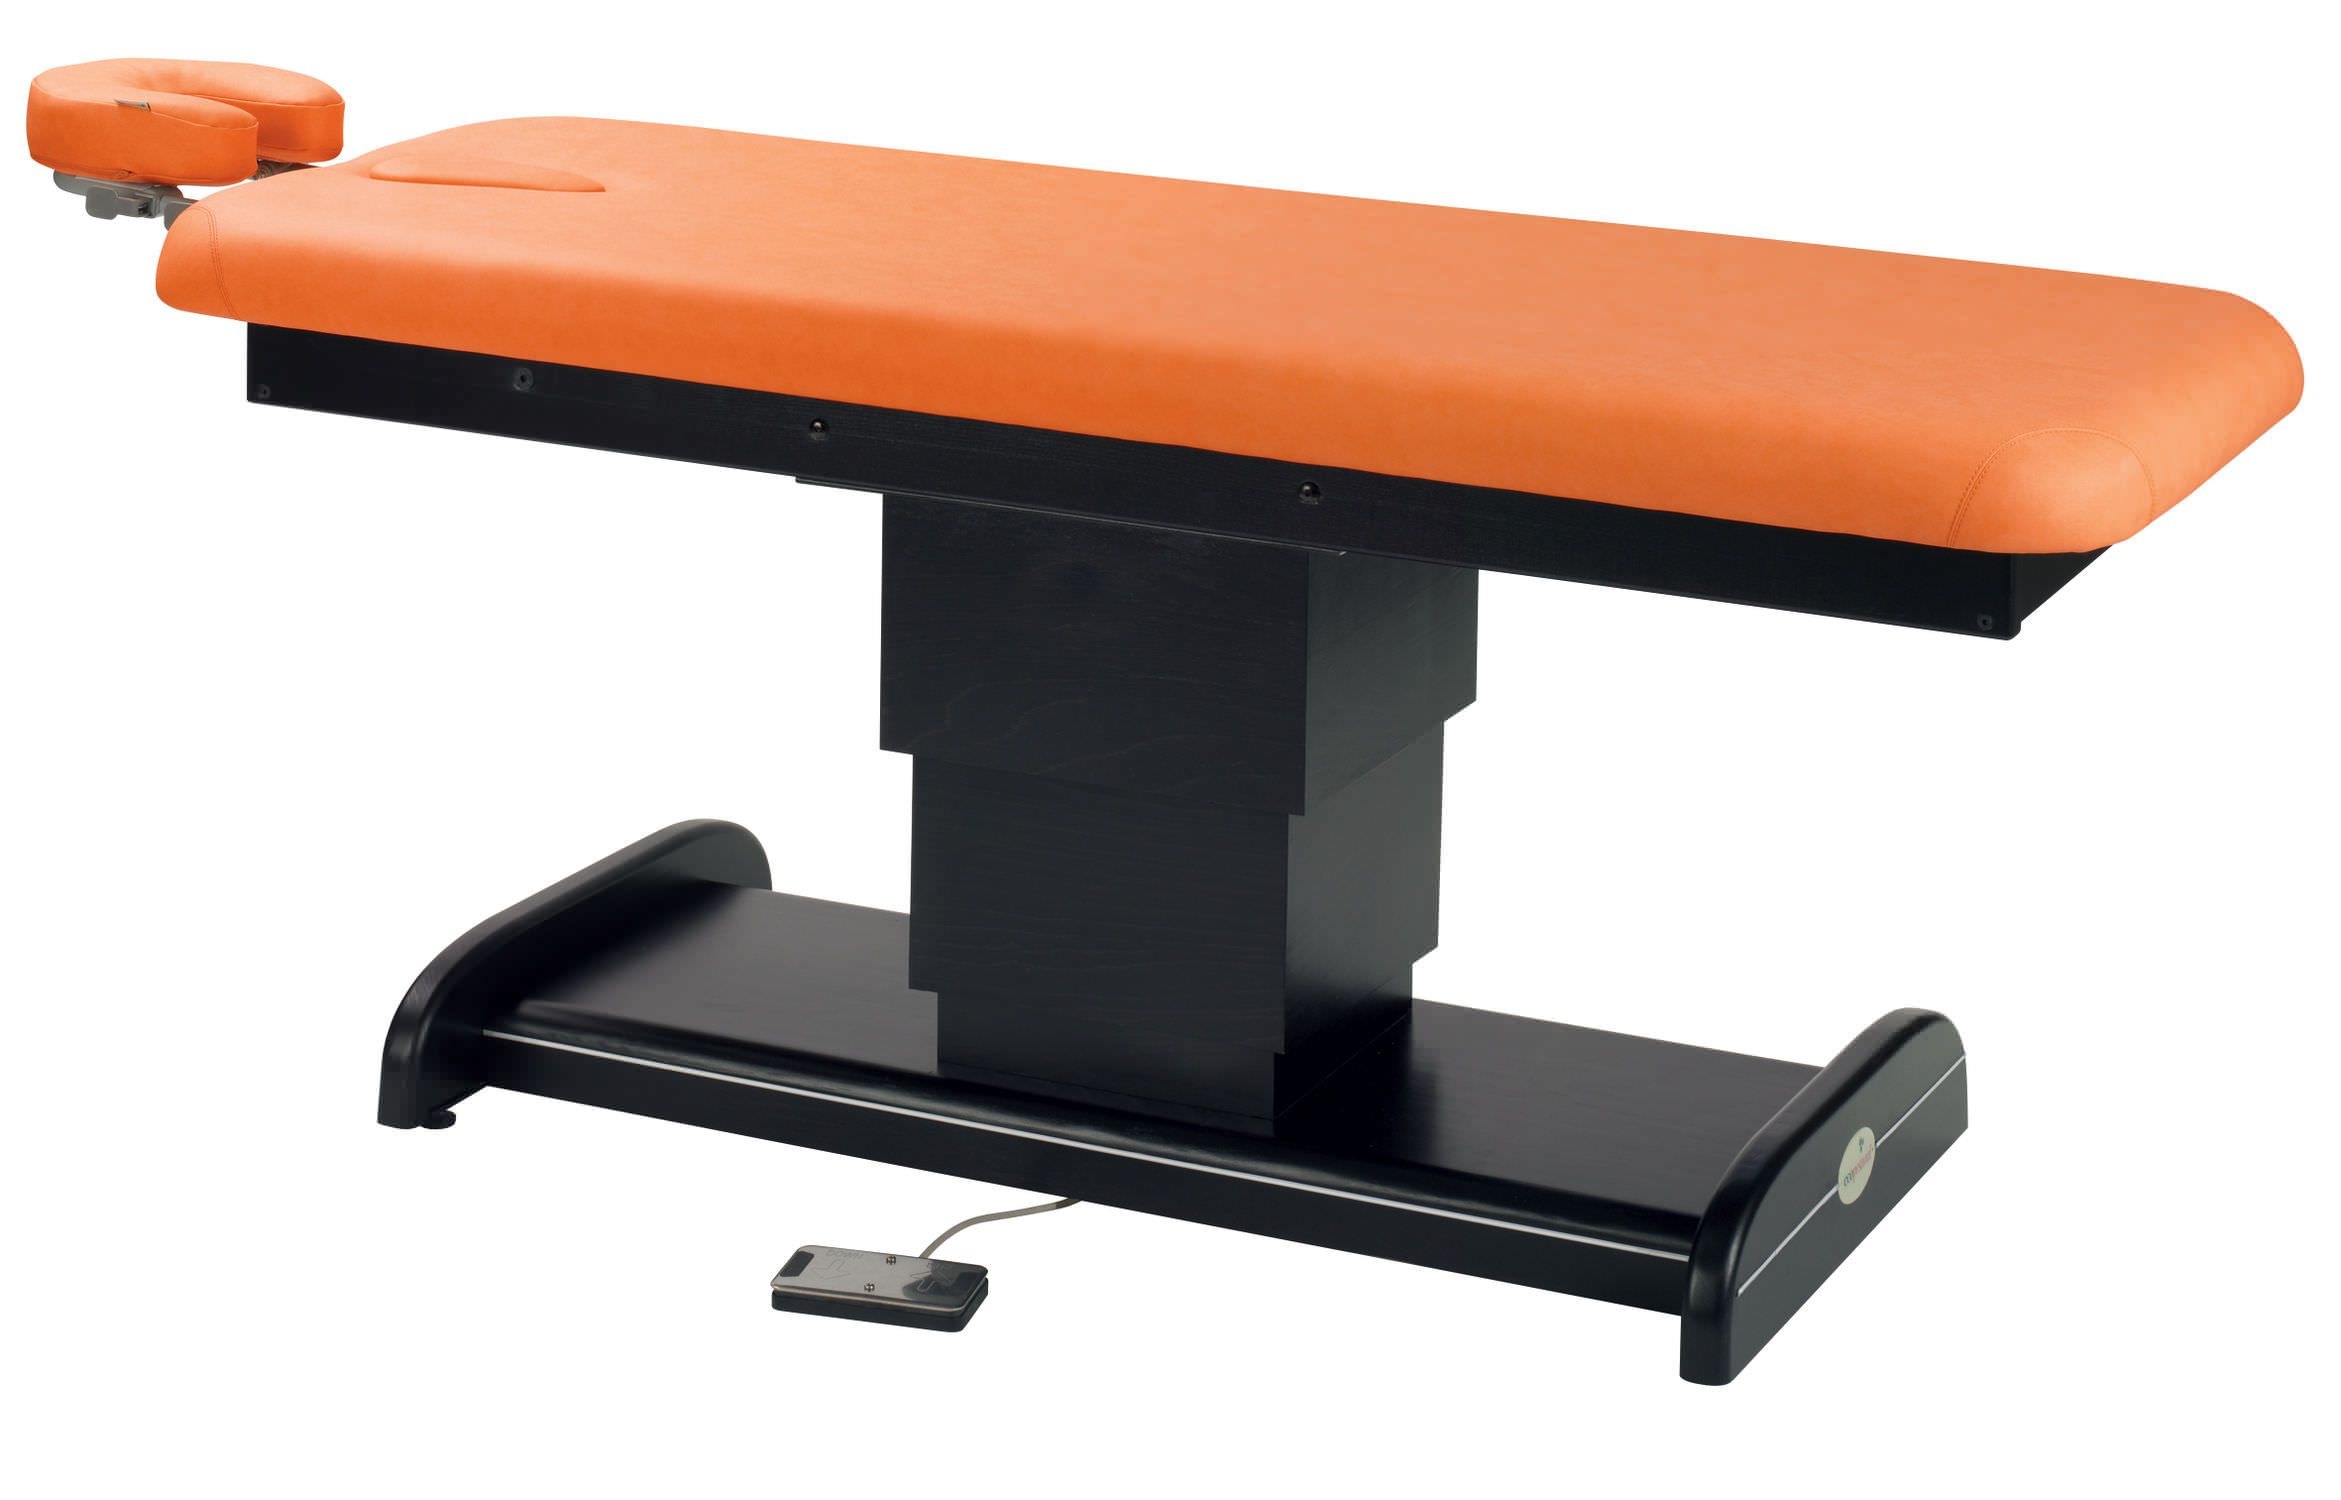 Electrical examination table / height-adjustable / 1-section C-6101W-M61 Ecopostural